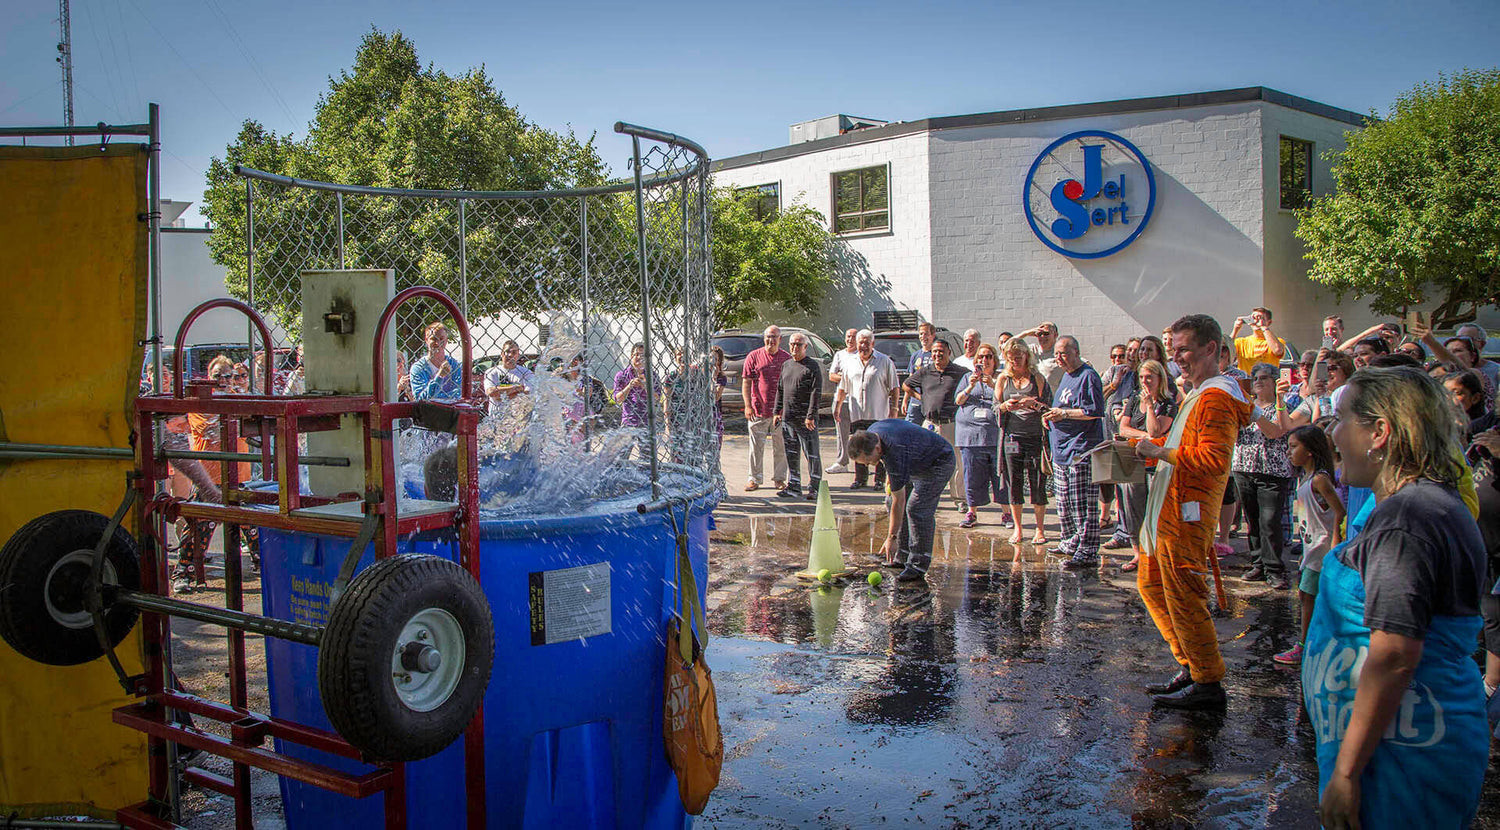 company dunk tank event outside of the office building